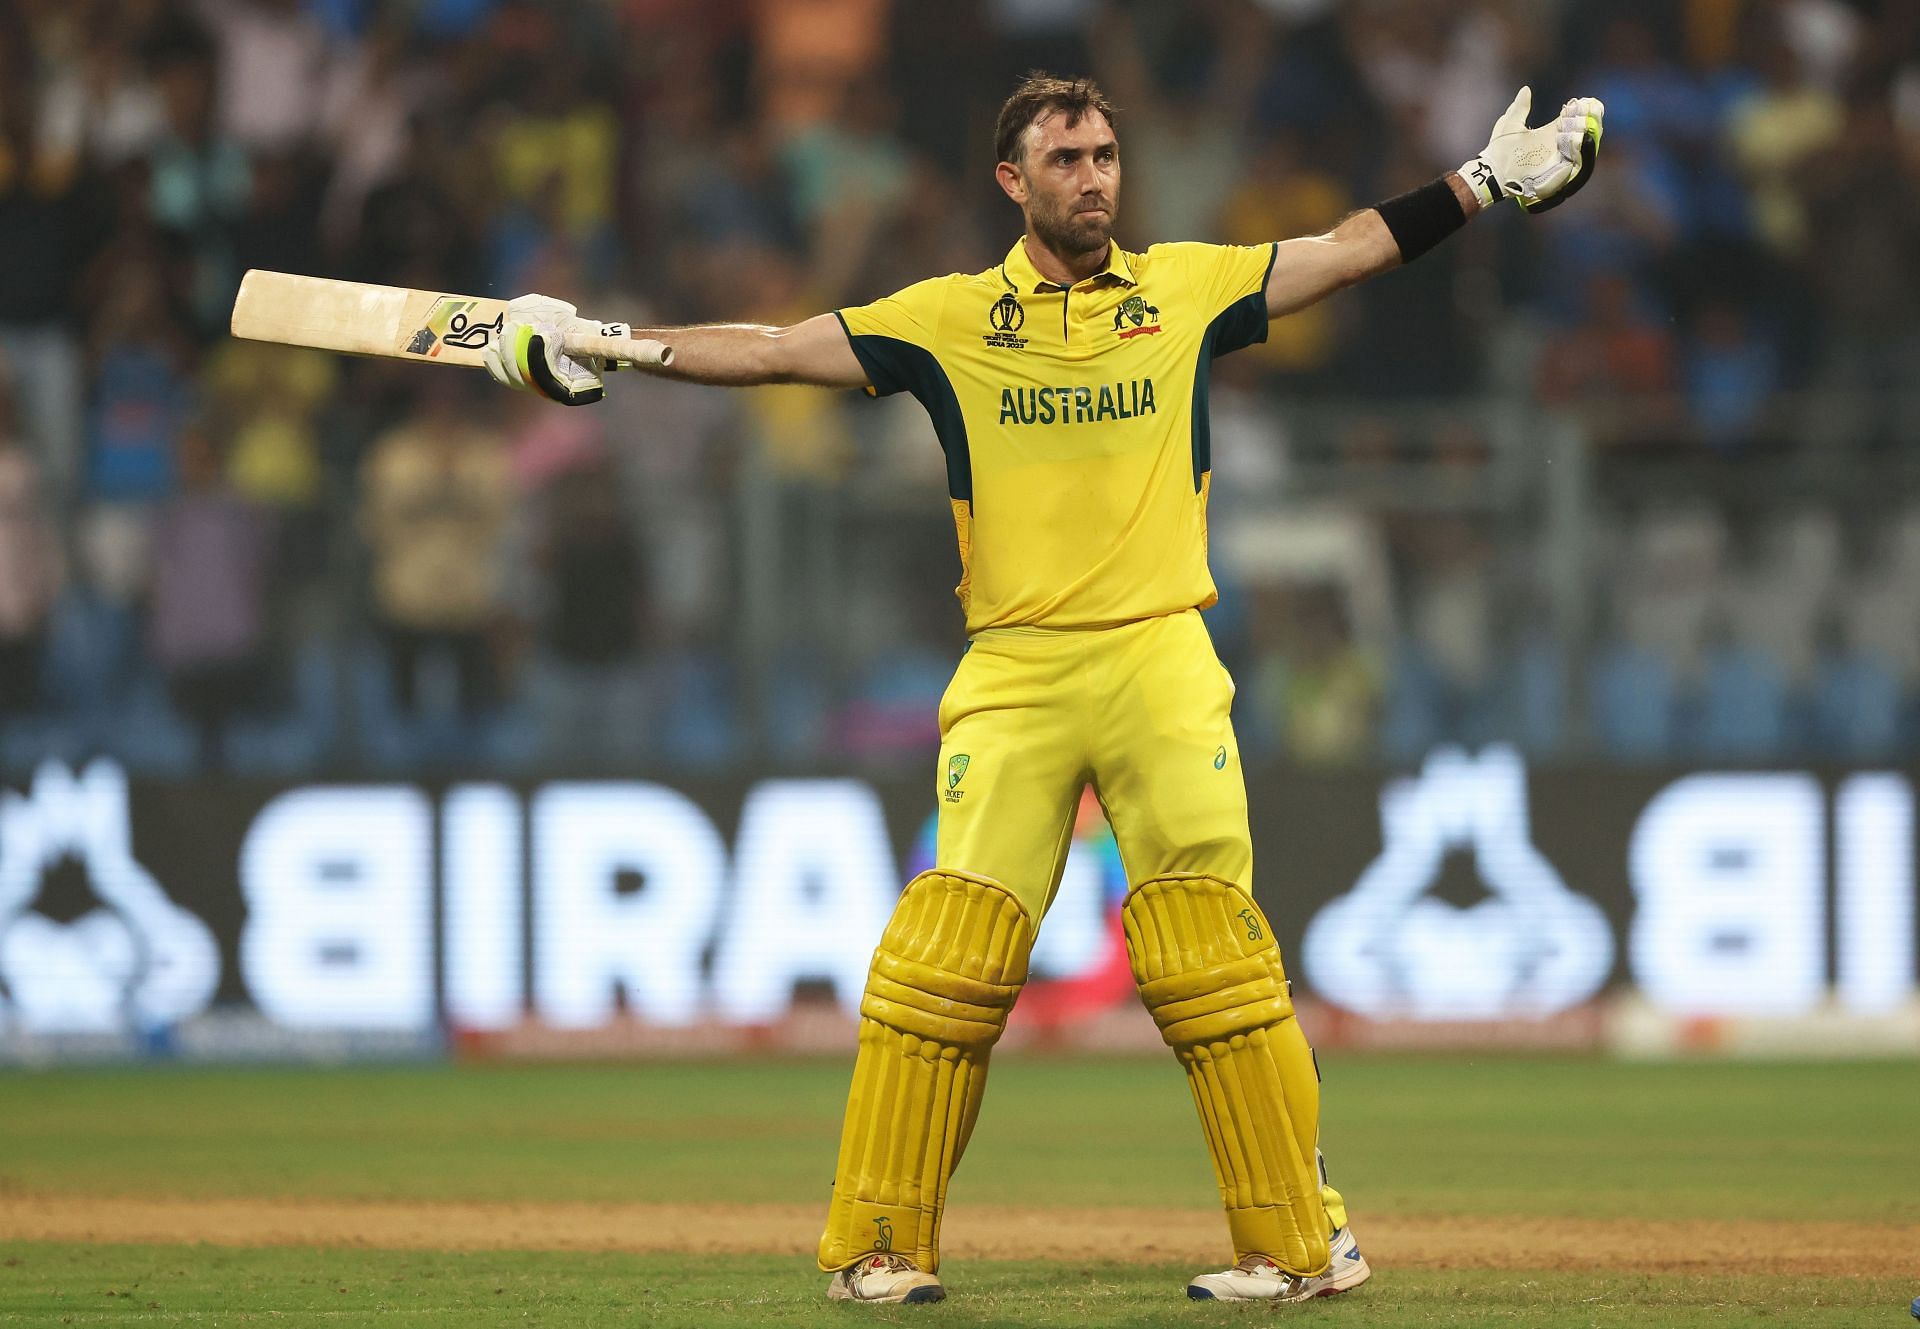 Glenn Maxwell celebrating after his heroics at Wankhede [Getty Images]